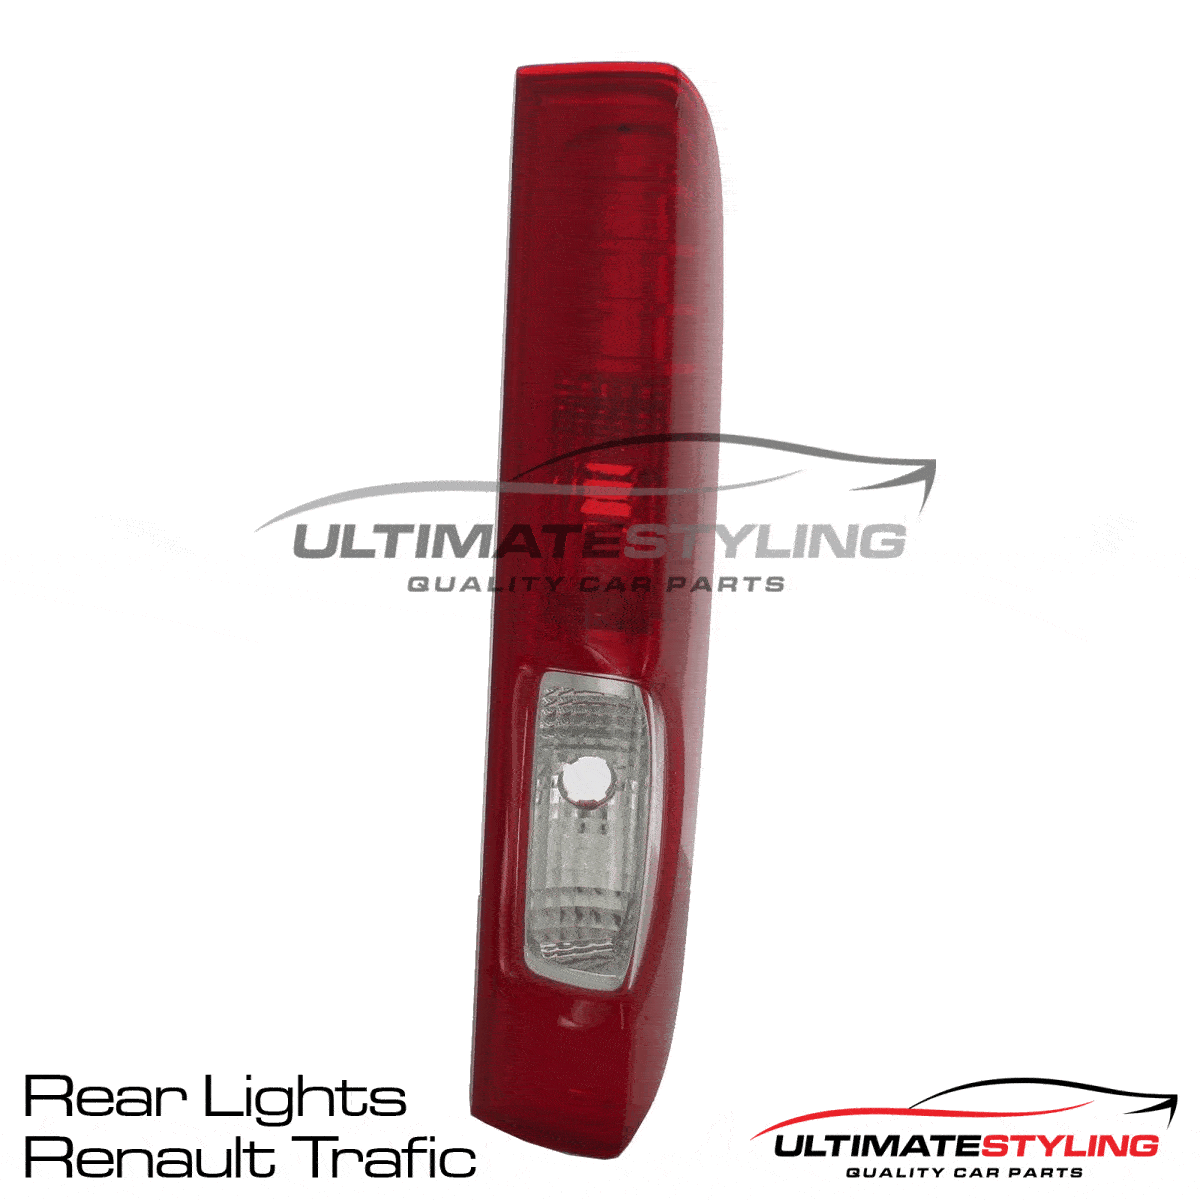 360 view of a Renault Trafic Rear Light